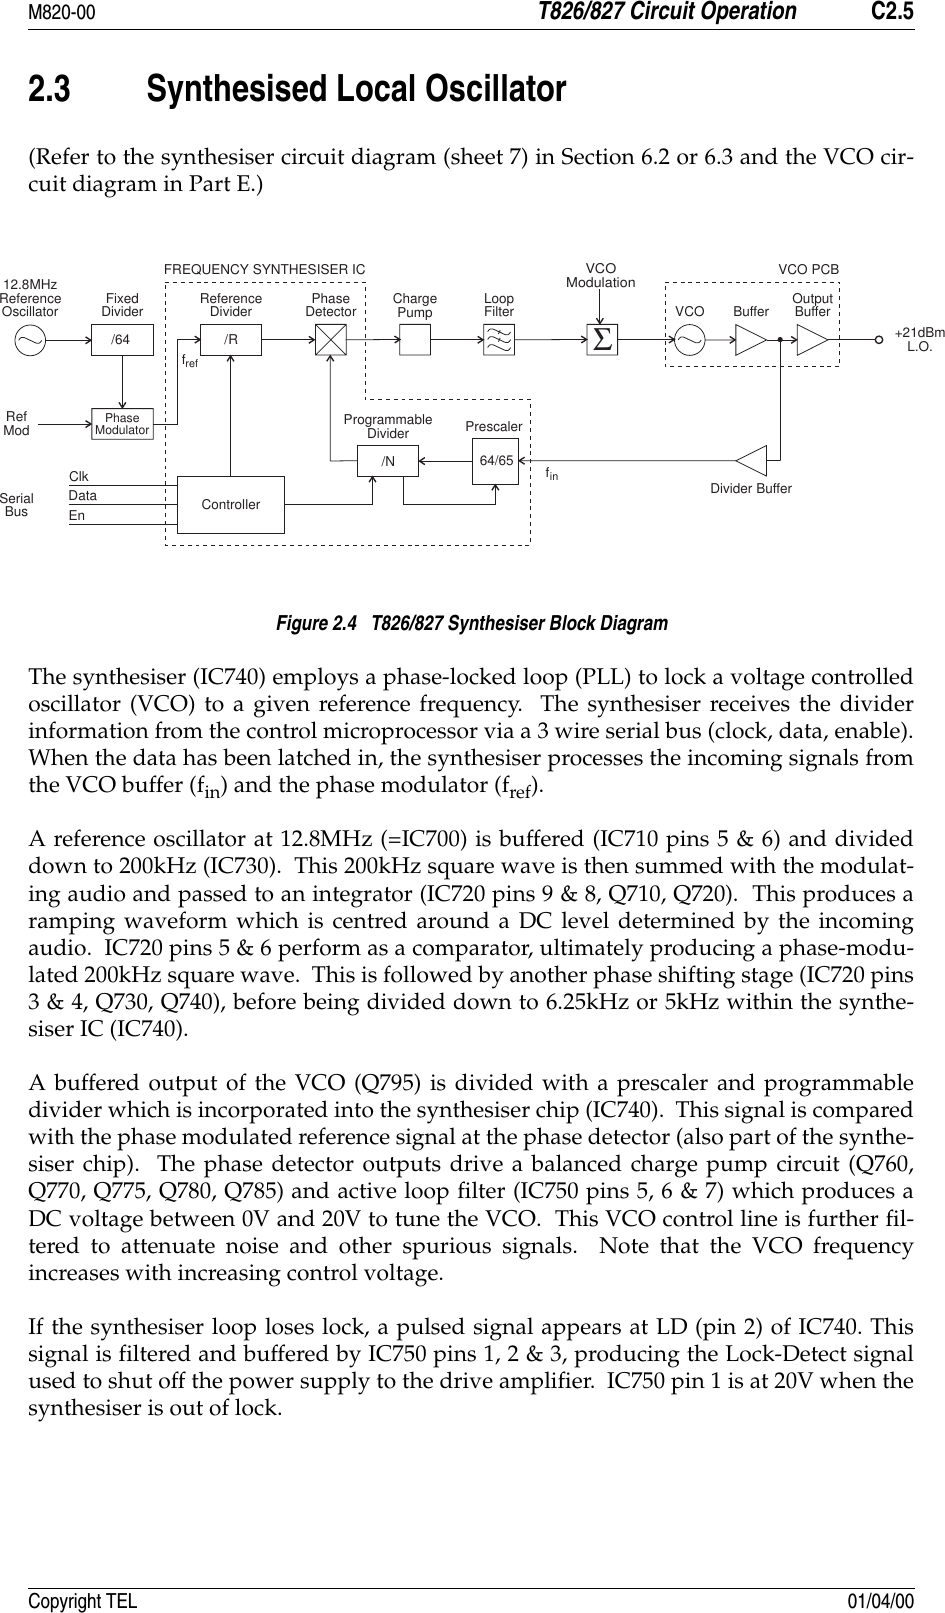 M820-00 T826/827 Circuit Operation C2.5Copyright TEL 01/04/002.3 Synthesised Local Oscillator(Refer to the synthesiser circuit diagram (sheet 7) in Section 6.2 or 6.3 and the VCO cir-cuit diagram in Part E.)Figure 2.4   T826/827 Synthesiser Block DiagramThe synthesiser (IC740) employs a phase-locked loop (PLL) to lock a voltage controlledoscillator (VCO) to a given reference frequency.  The synthesiser receives the dividerinformation from the control microprocessor via a 3 wire serial bus (clock, data, enable).When the data has been latched in, the synthesiser processes the incoming signals fromthe VCO buffer (fin) and the phase modulator (fref).A reference oscillator at 12.8MHz (=IC700) is buffered (IC710 pins 5 &amp; 6) and divideddown to 200kHz (IC730).  This 200kHz square wave is then summed with the modulat-ing audio and passed to an integrator (IC720 pins 9 &amp; 8, Q710, Q720).  This produces aramping waveform which is centred around a DC level determined by the incomingaudio.  IC720 pins 5 &amp; 6 perform as a comparator, ultimately producing a phase-modu-lated 200kHz square wave.  This is followed by another phase shifting stage (IC720 pins3 &amp; 4, Q730, Q740), before being divided down to 6.25kHz or 5kHz within the synthe-siser IC (IC740).A buffered output of the VCO (Q795) is divided with a prescaler and programmabledivider which is incorporated into the synthesiser chip (IC740).  This signal is comparedwith the phase modulated reference signal at the phase detector (also part of the synthe-siser chip).  The phase detector outputs drive a balanced charge pump circuit (Q760,Q770, Q775, Q780, Q785) and active loop filter (IC750 pins 5, 6 &amp; 7) which produces aDC voltage between 0V and 20V to tune the VCO.  This VCO control line is further fil-tered to attenuate noise and other spurious signals.  Note that the VCO frequencyincreases with increasing control voltage.If the synthesiser loop loses lock, a pulsed signal appears at LD (pin 2) of IC740. Thissignal is filtered and buffered by IC750 pins 1, 2 &amp; 3, producing the Lock-Detect signalused to shut off the power supply to the drive amplifier.  IC750 pin 1 is at 20V when thesynthesiser is out of lock./RReferenceDivider12.8MHzReferenceOscillator FixedDivider/64PhaseModulatorRefModPhaseDetector ChargePump LoopFilterFREQUENCY SYNTHESISER ICSerialBusClkDataEn Controller/NProgrammableDivider64/65PrescalerVCO PCBVCO ModulationVCO Buffer OutputBuffer+21dBmL.O.Divider BufferfreffinΣ